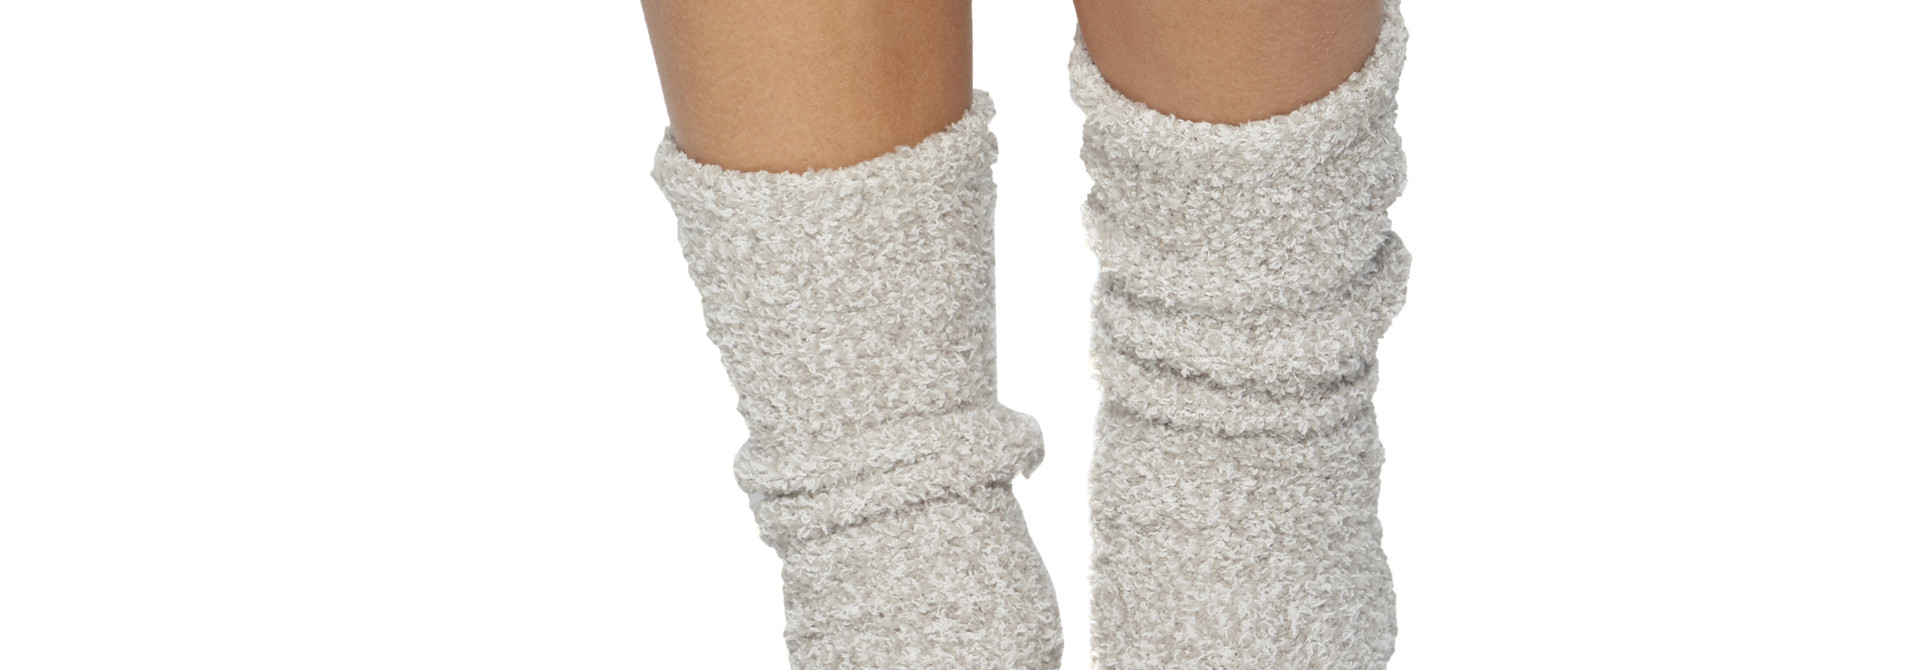 CozyChic | The Women's Heathered Sock Collection